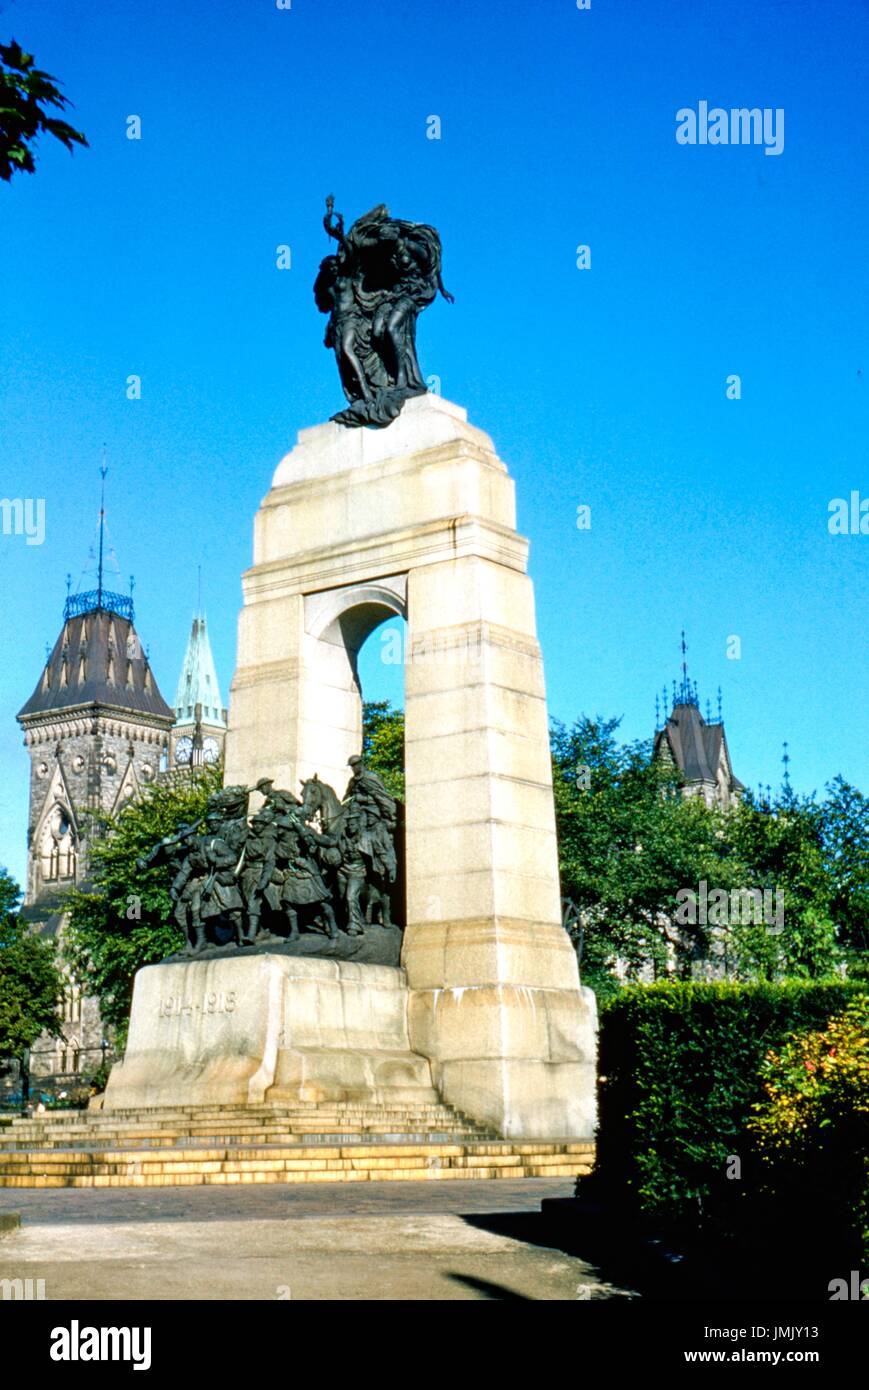 World War 1 memorial, with statue of soldiers and inscription providing the years 1914-1918, 1955. Stock Photo